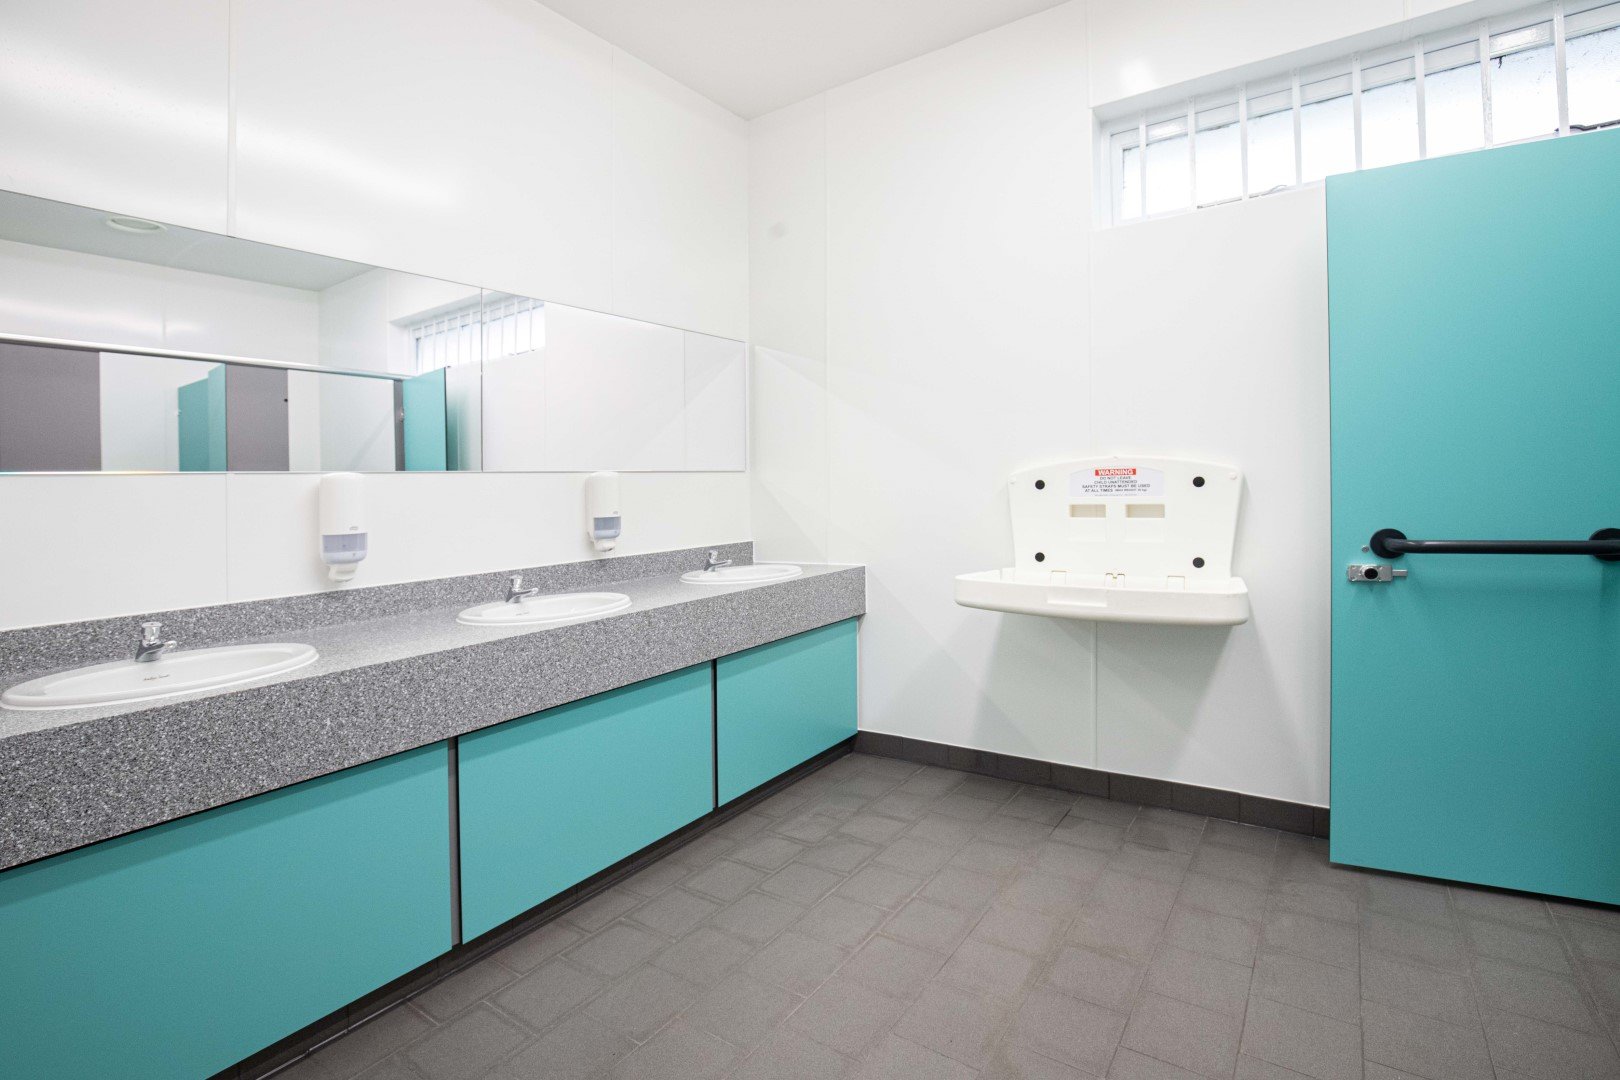 washroom at riverside campsite with row of vanity units in blue and a solid surface top.jpg